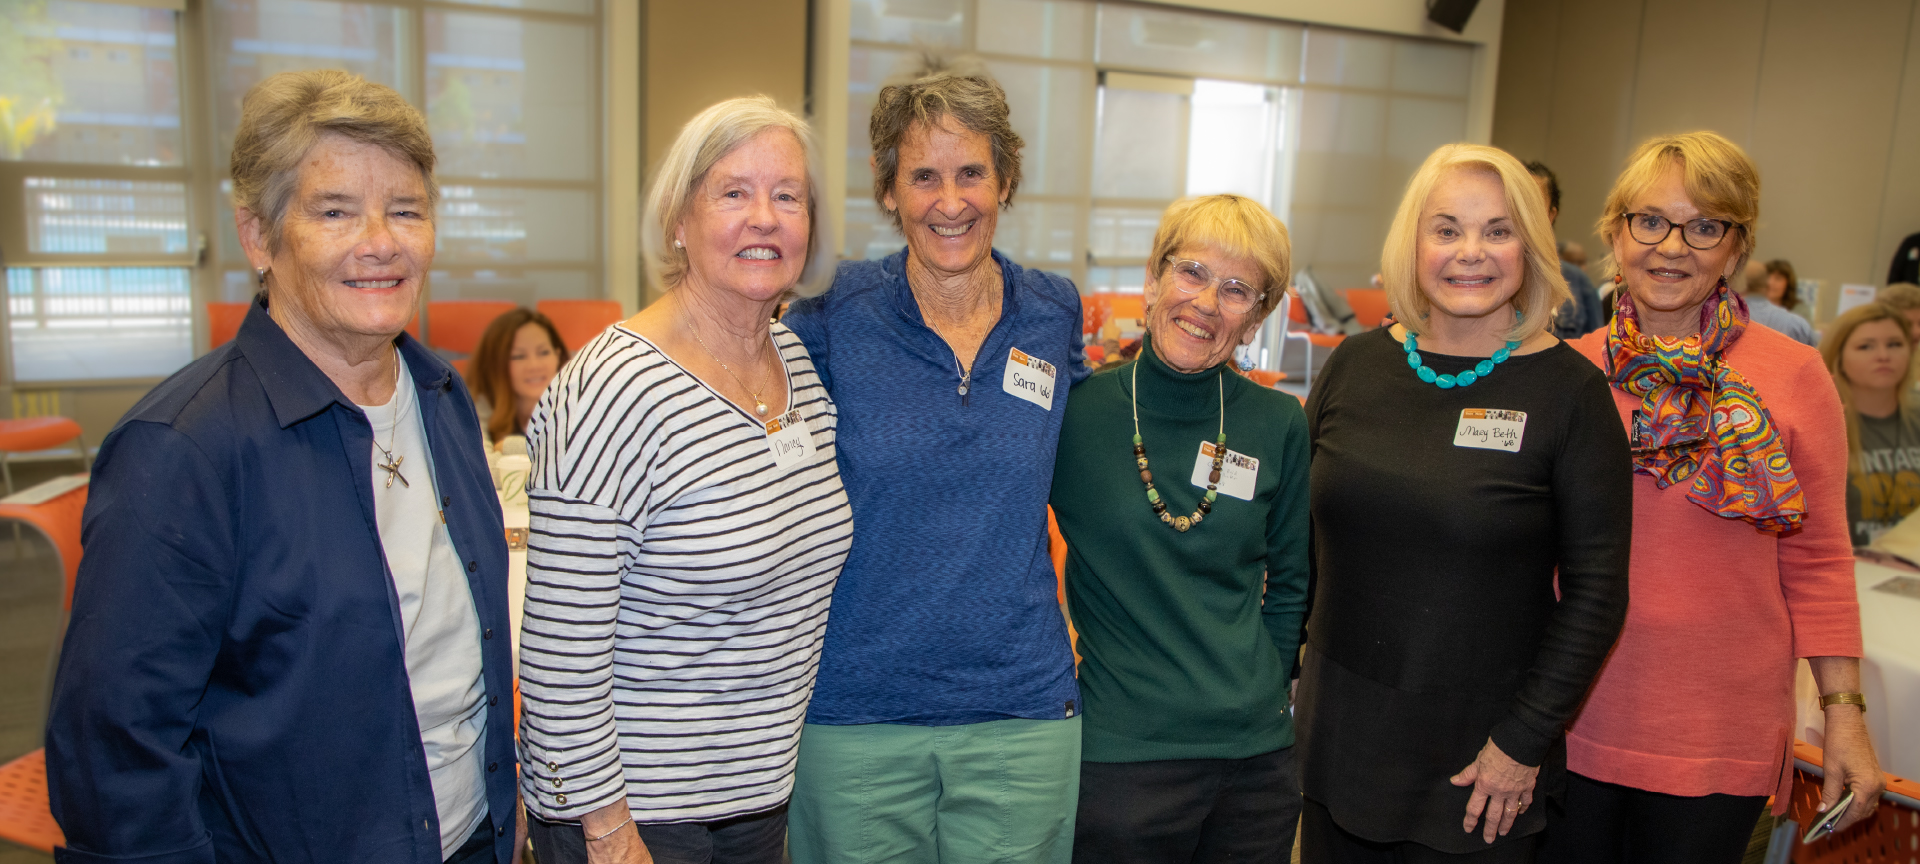 Six of Pitzer’s early alumnae stand with their arms around each other and smile. Behind them are people gathered in orange chairs around round tables.